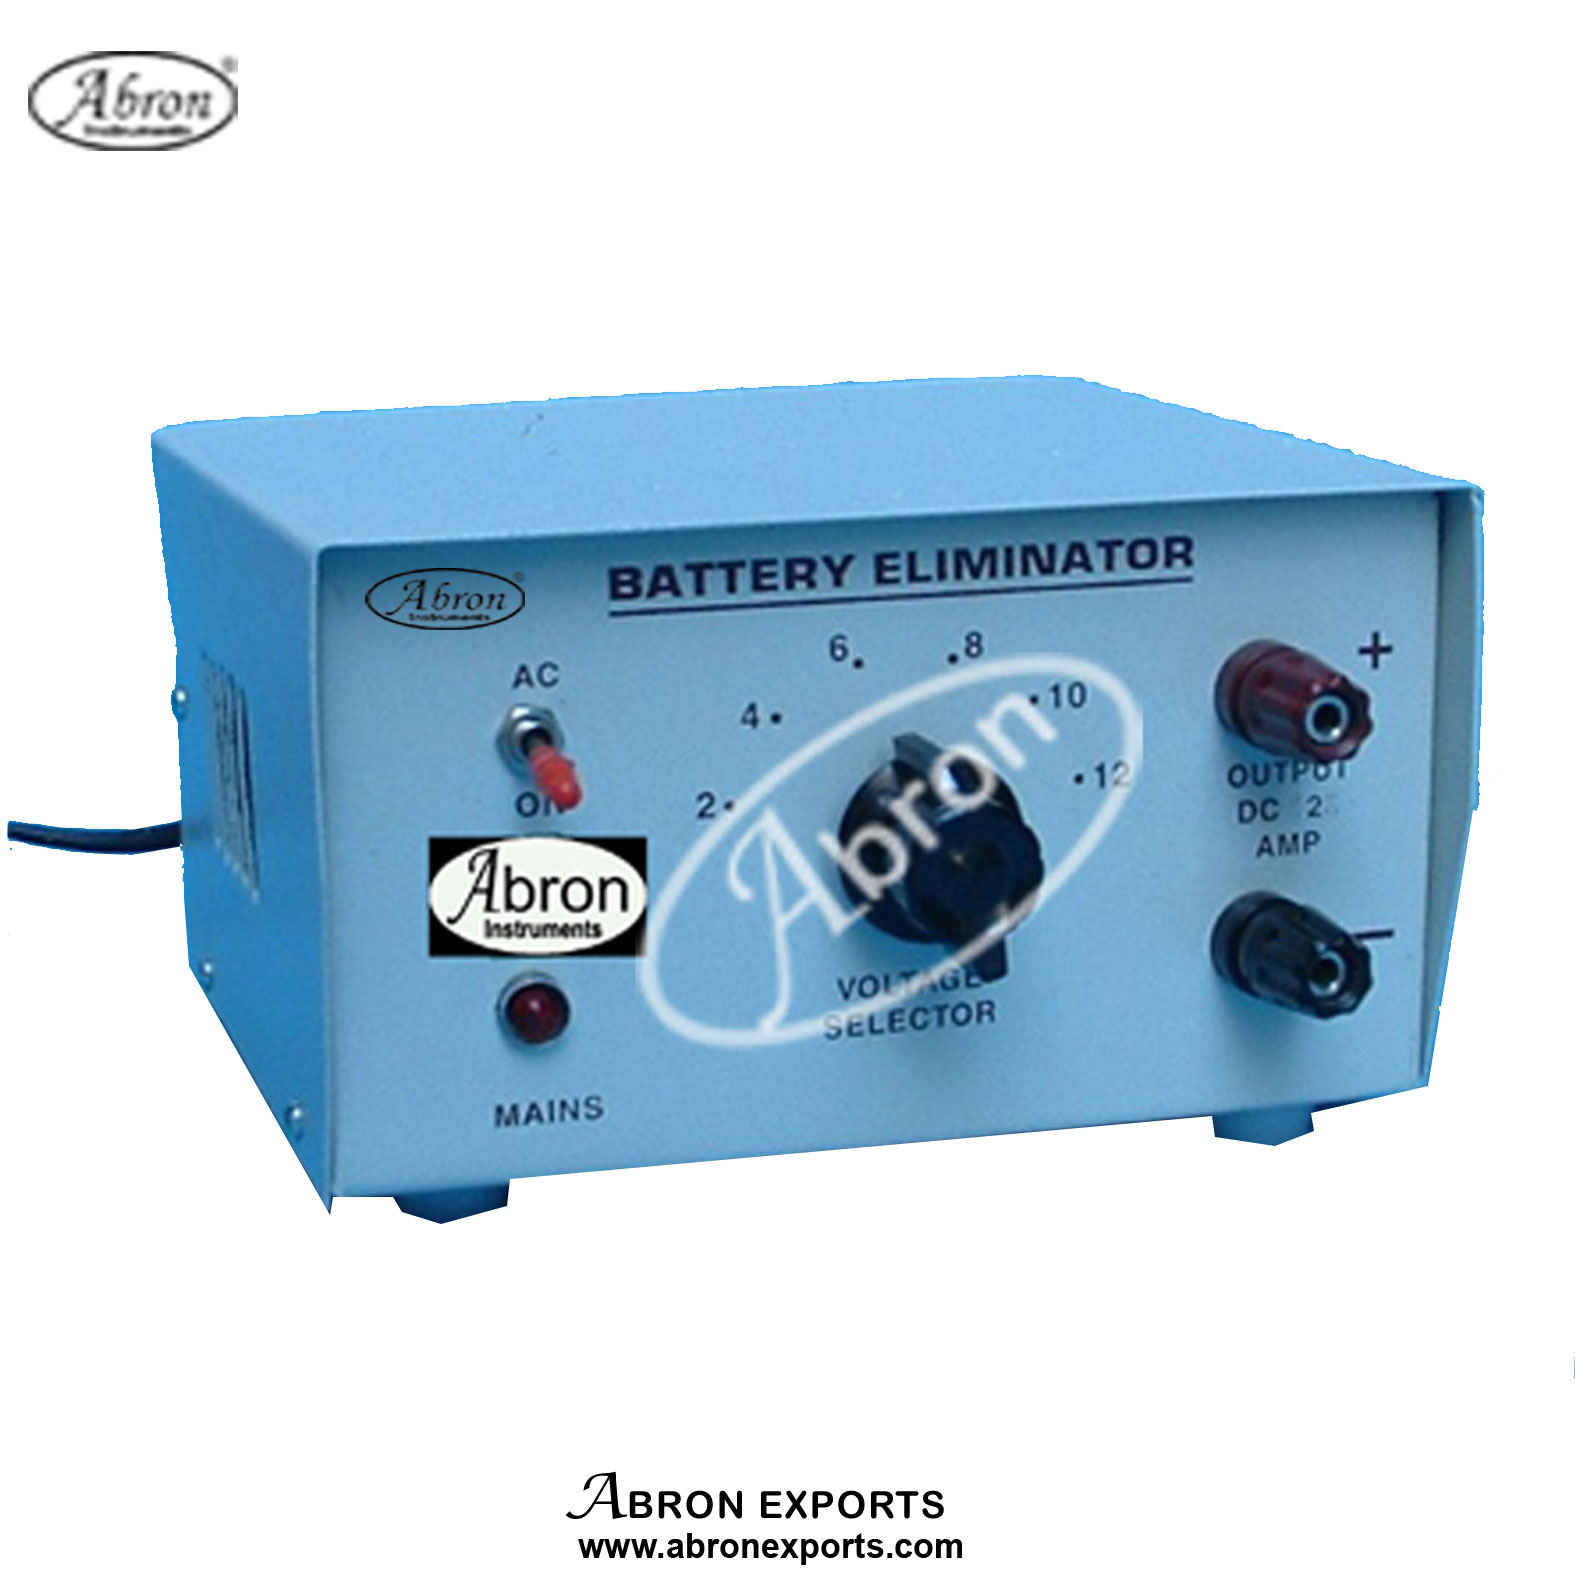 Battery Eliminator AC-DC 2/3/5 A0-12 V IN Steps with power supply abron AE-1205-D